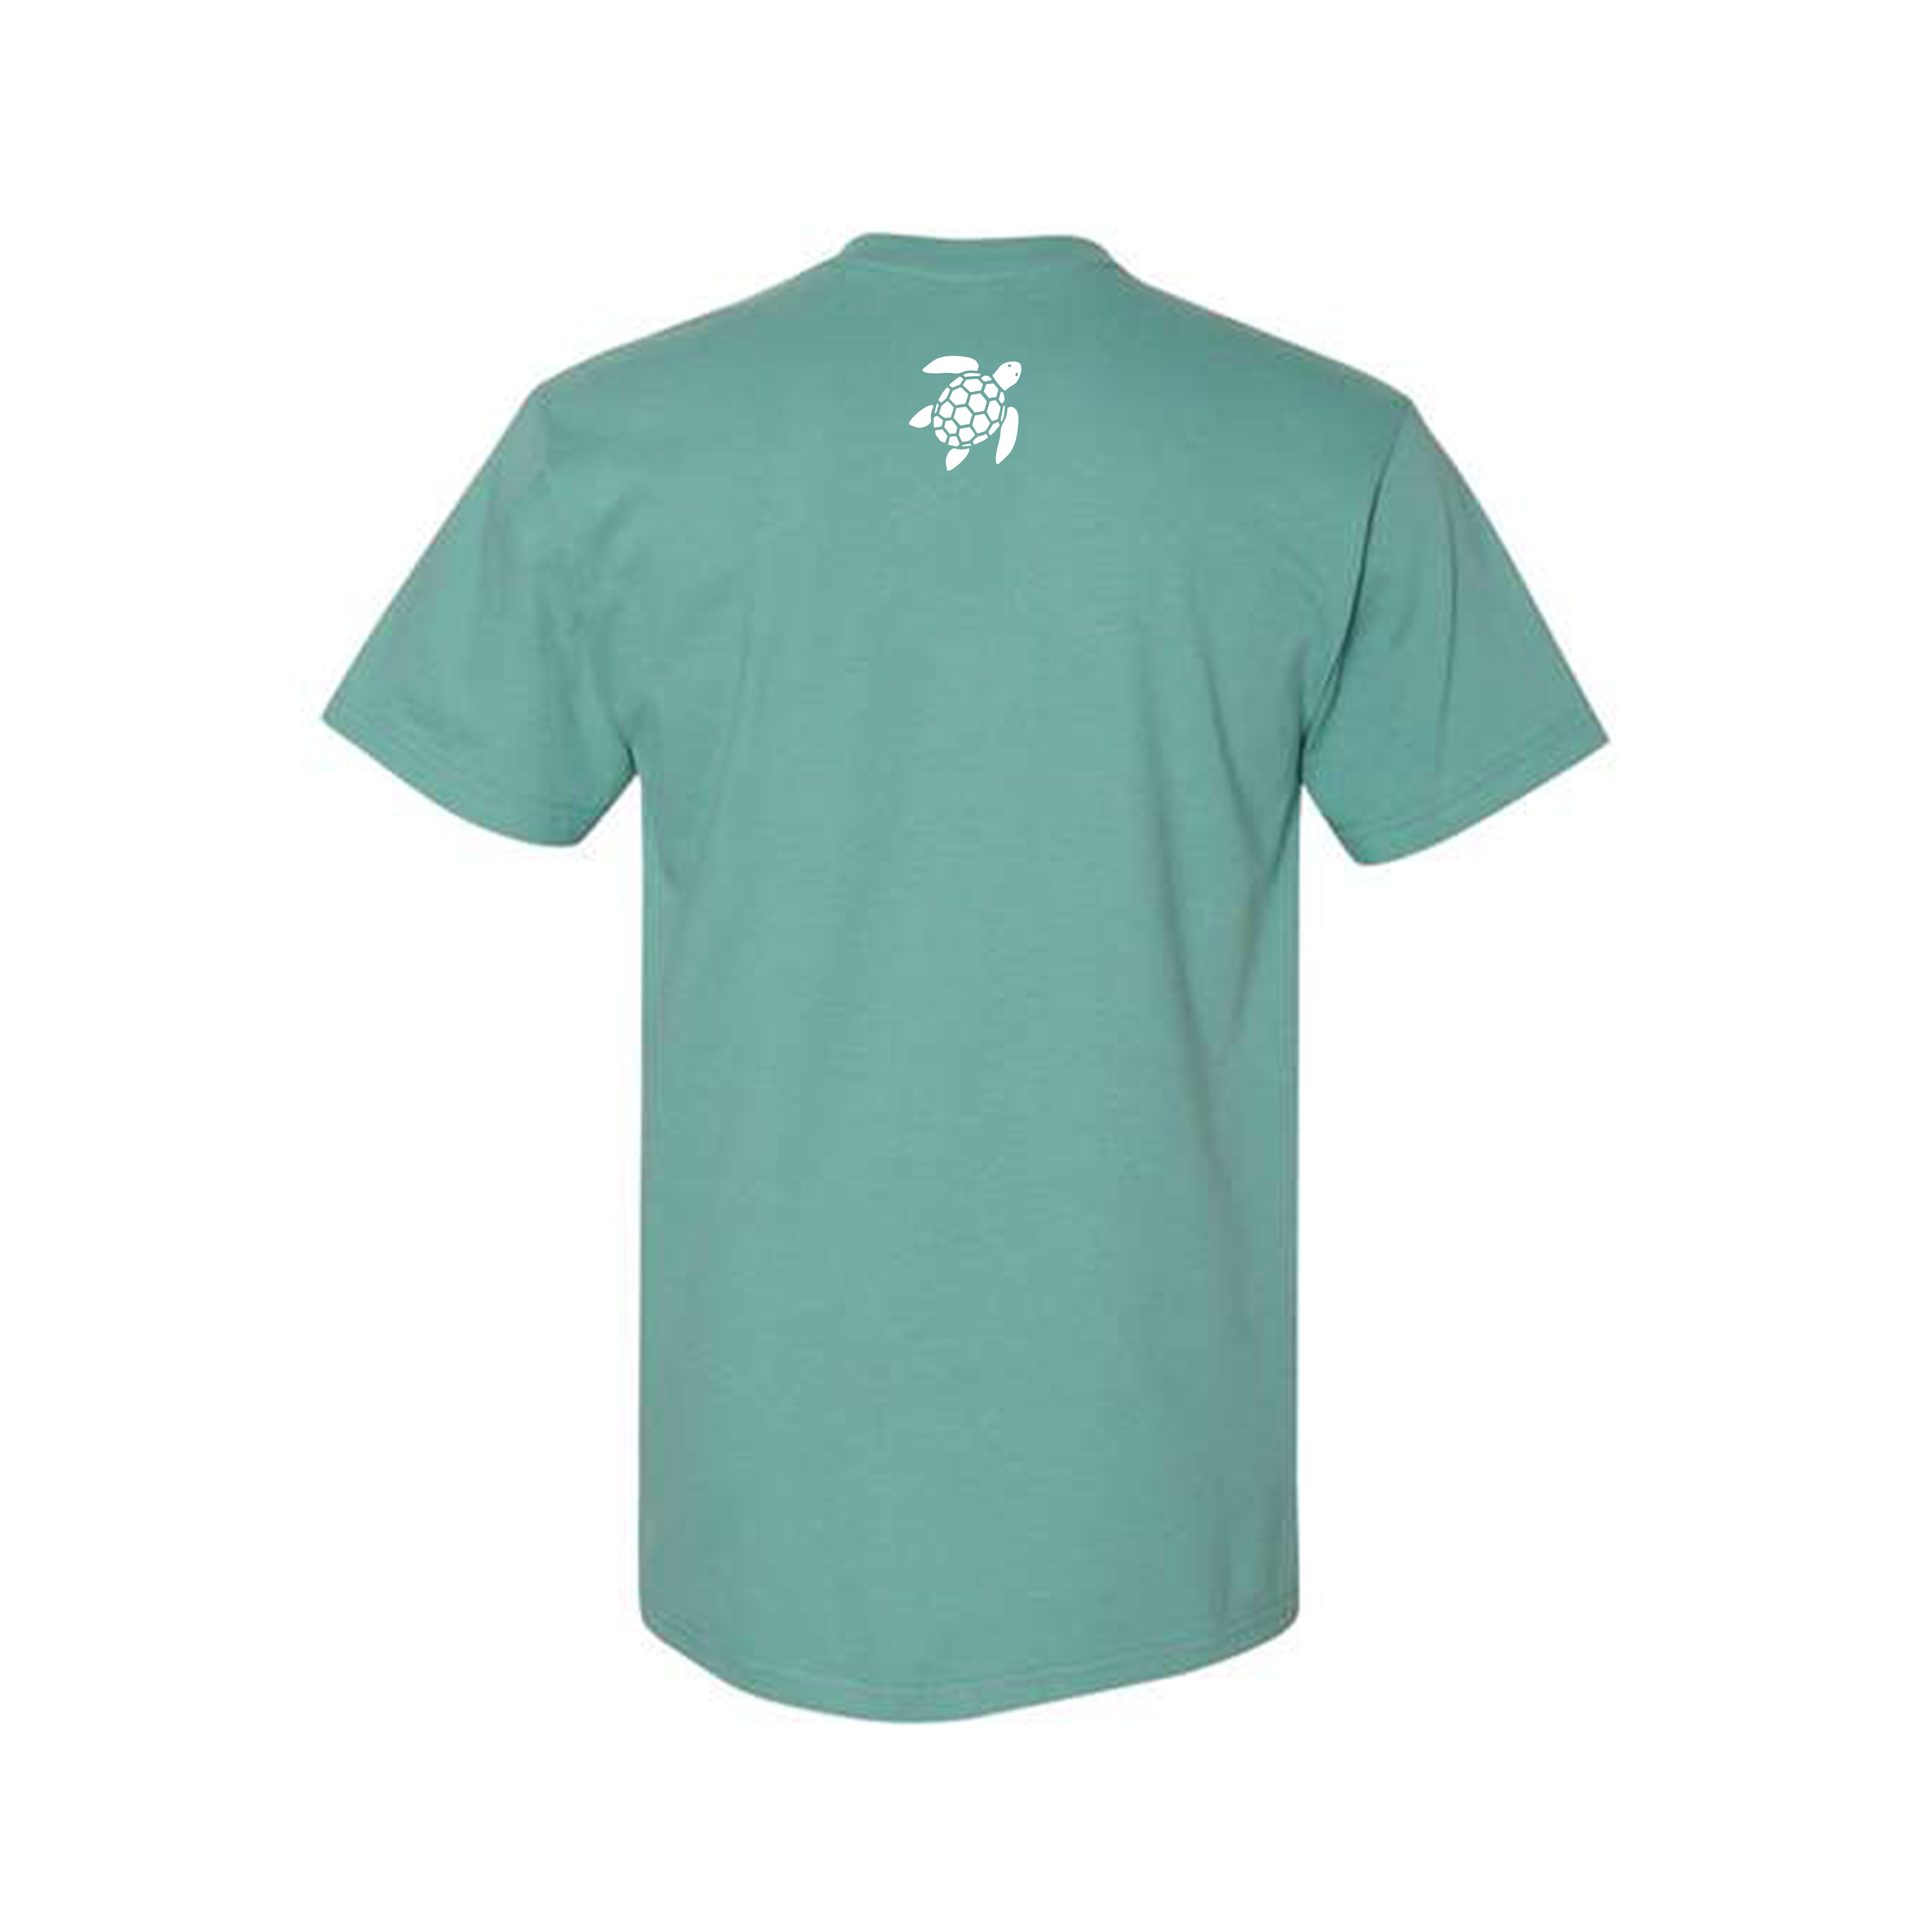 Ice Blue stacked Sea Green logo on front chest and Ice Blue turtle on back center neck 5.3 Ounce, 100% Heavy Cotton Seamless double-needle 7/8" collar Double-needle sleeves and hem